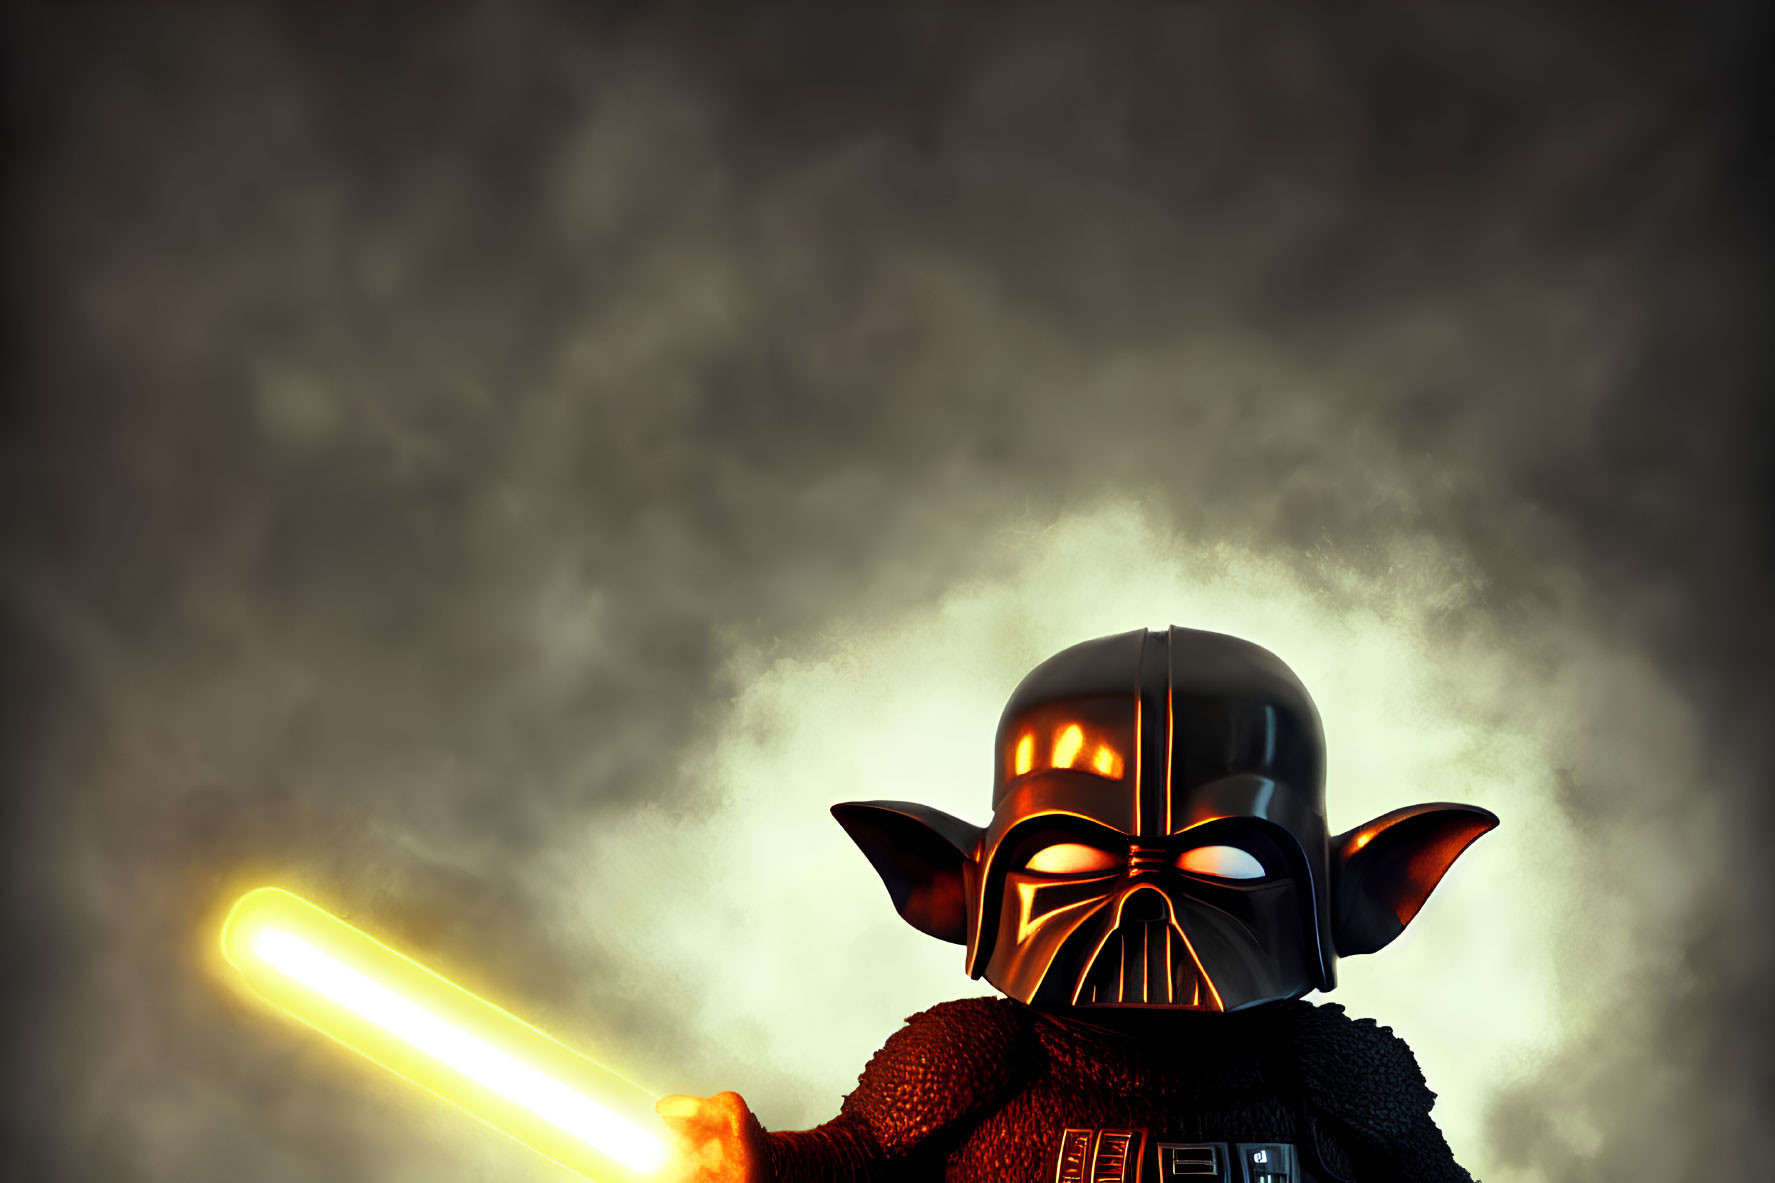 Pop culture character in dark armor wields yellow lightsaber in dramatic scene